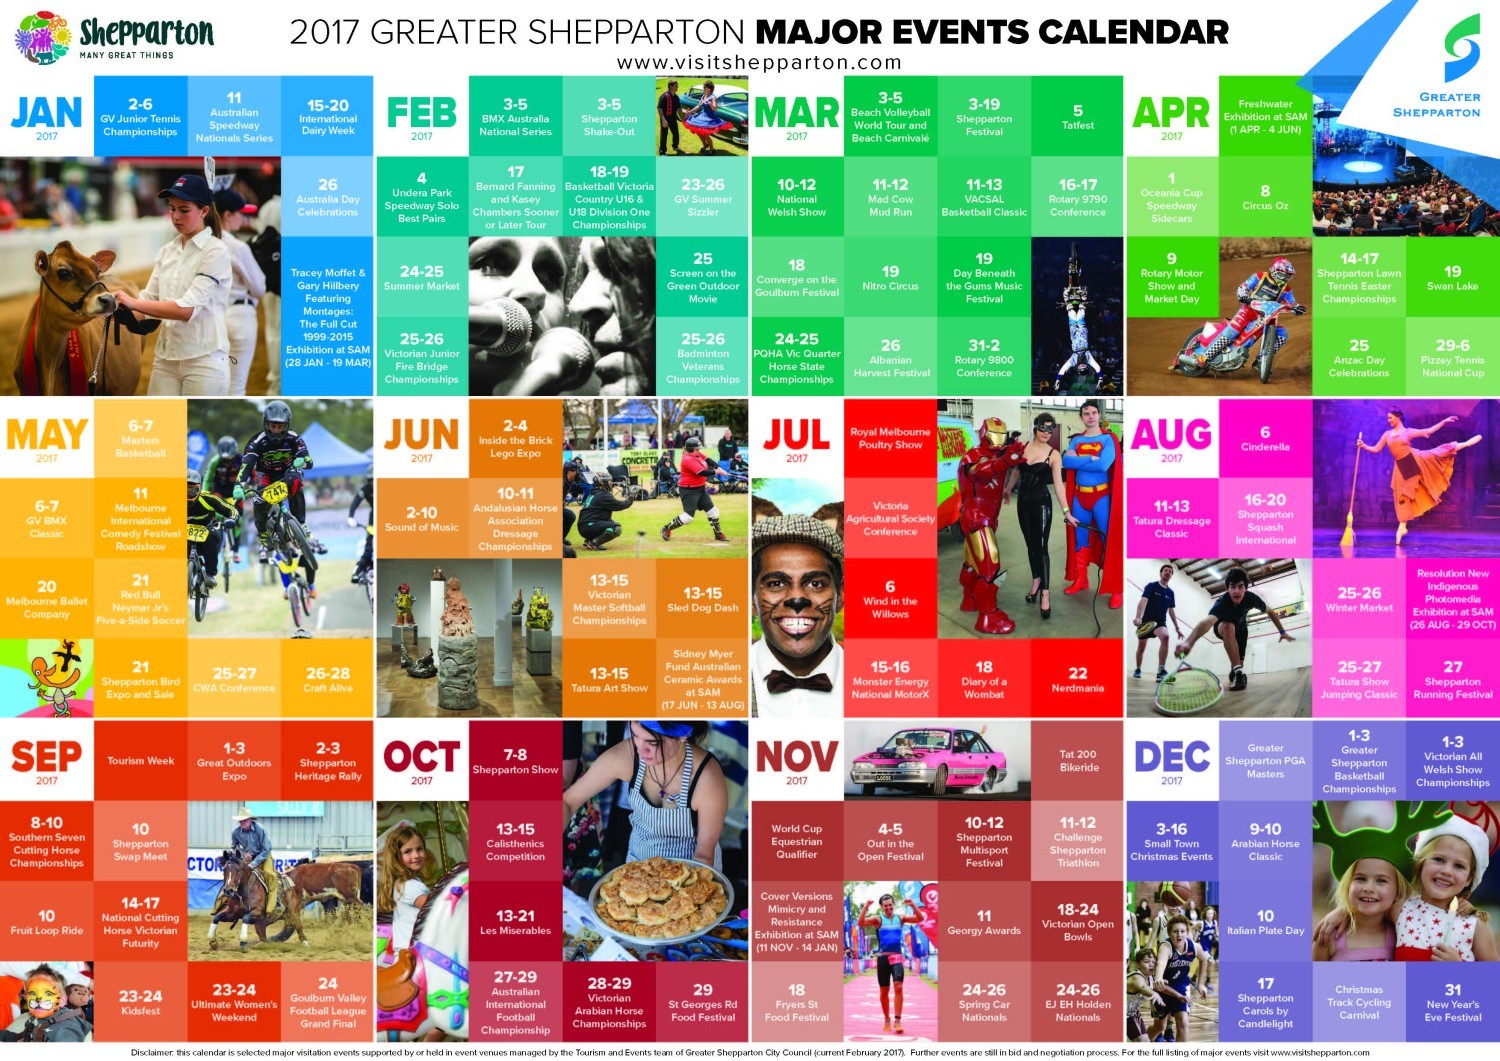 2017-tourism-and-events-calendar-launched-greater-shepparton-city-council